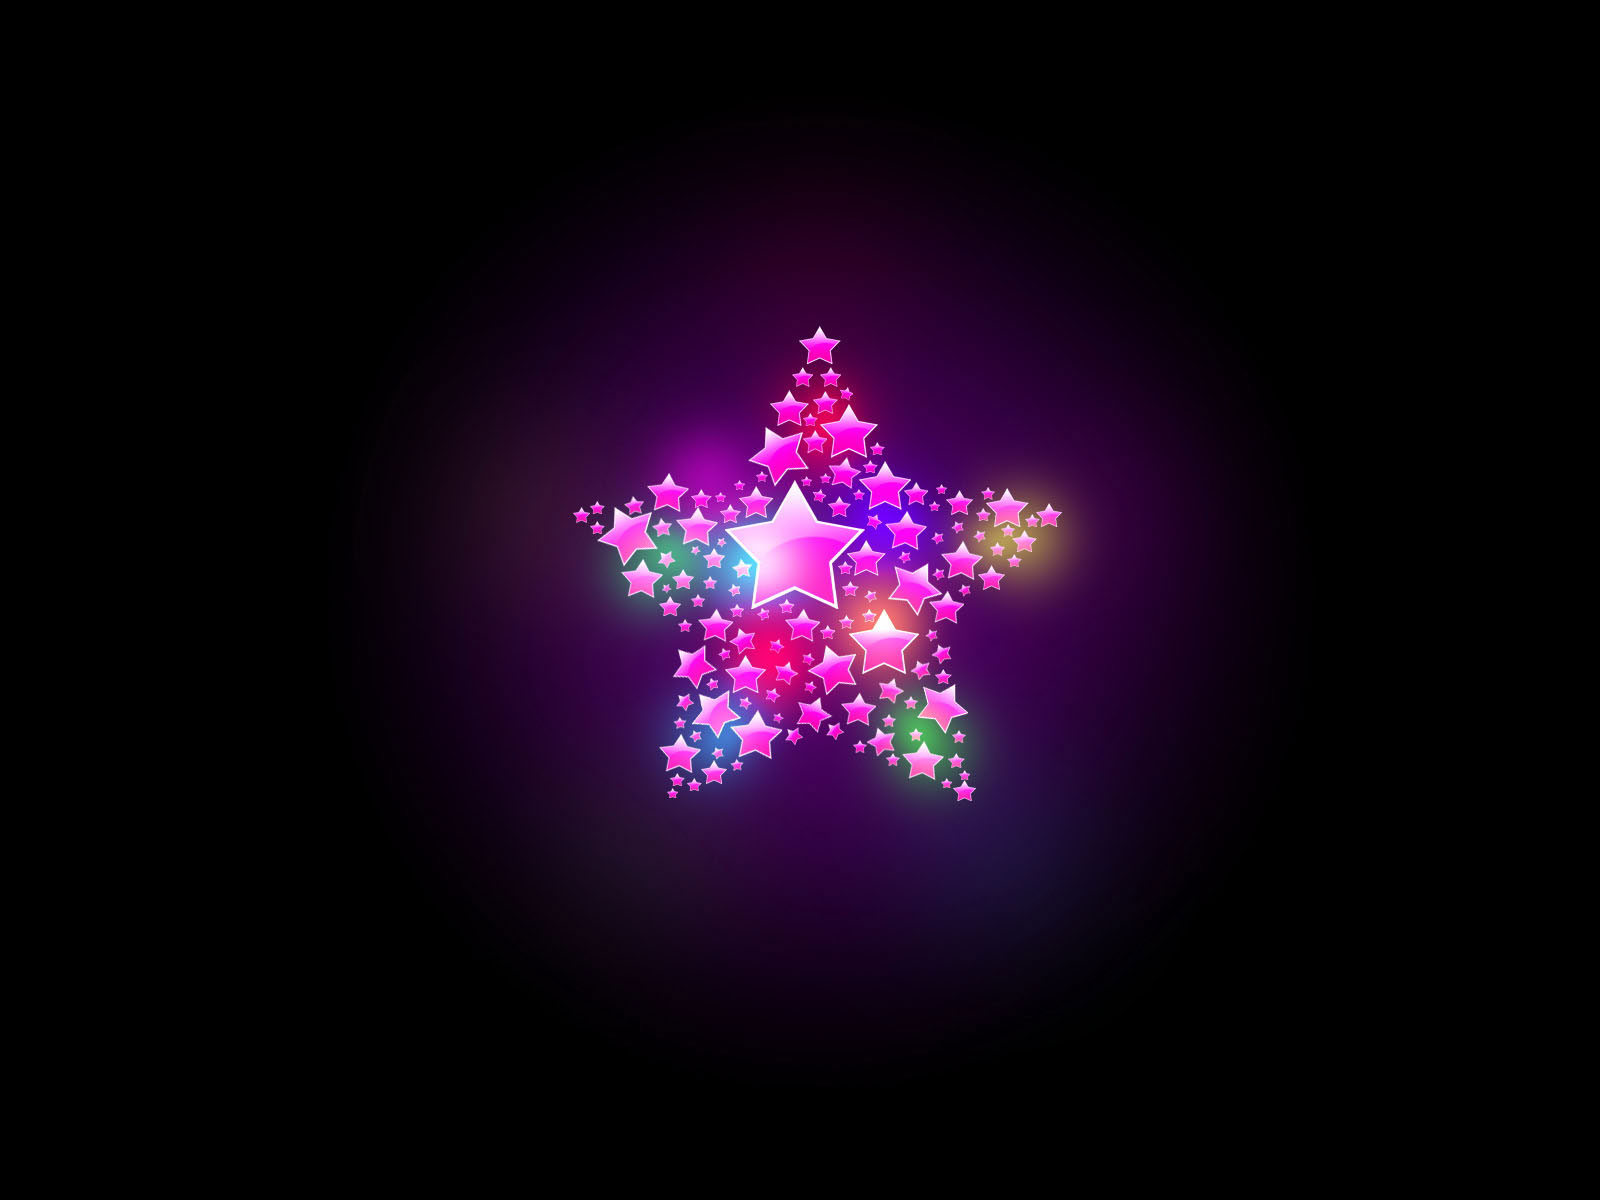 Bright star design wallpaper colorful desktop background Abstract